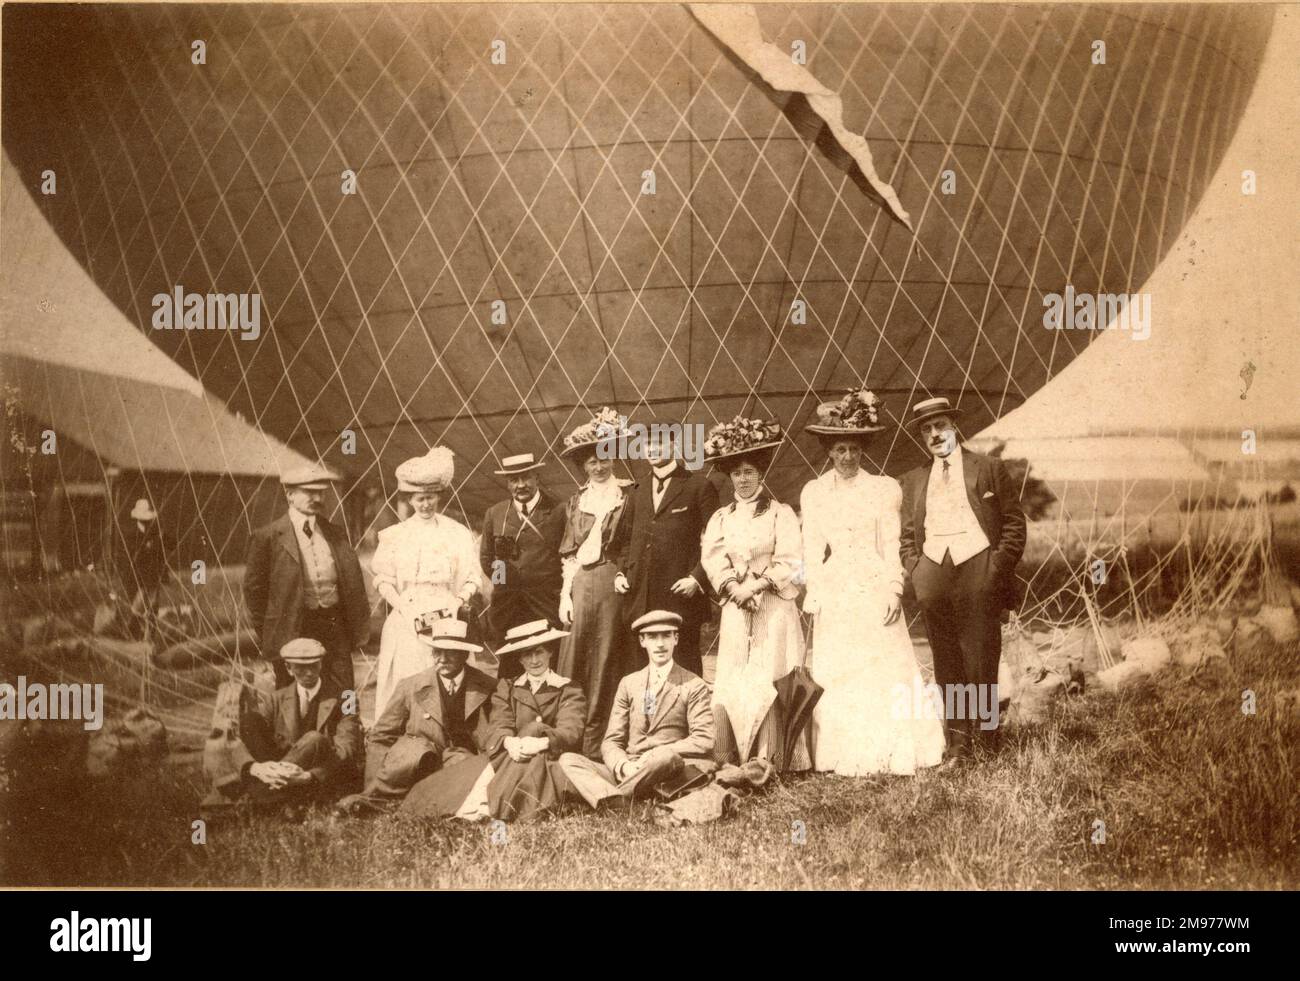 Ascent of three balloons at Avington Park, near Winchester, June 1908. Sir John and Lady Shelley’s balloon party. The group includes: Viscountess Hardinge, Hon C.S. Rolls (centre standing), Hon E. Agar-Robartes, Major Baden-Powell, Lady Shelley, Mr F. Butler, Lady Constance Dudley-Ryder, Mr Dumoille, Prof Huntingdon, Mrs Dunvilla, Mr Gardner and Major Bolton. Stock Photo